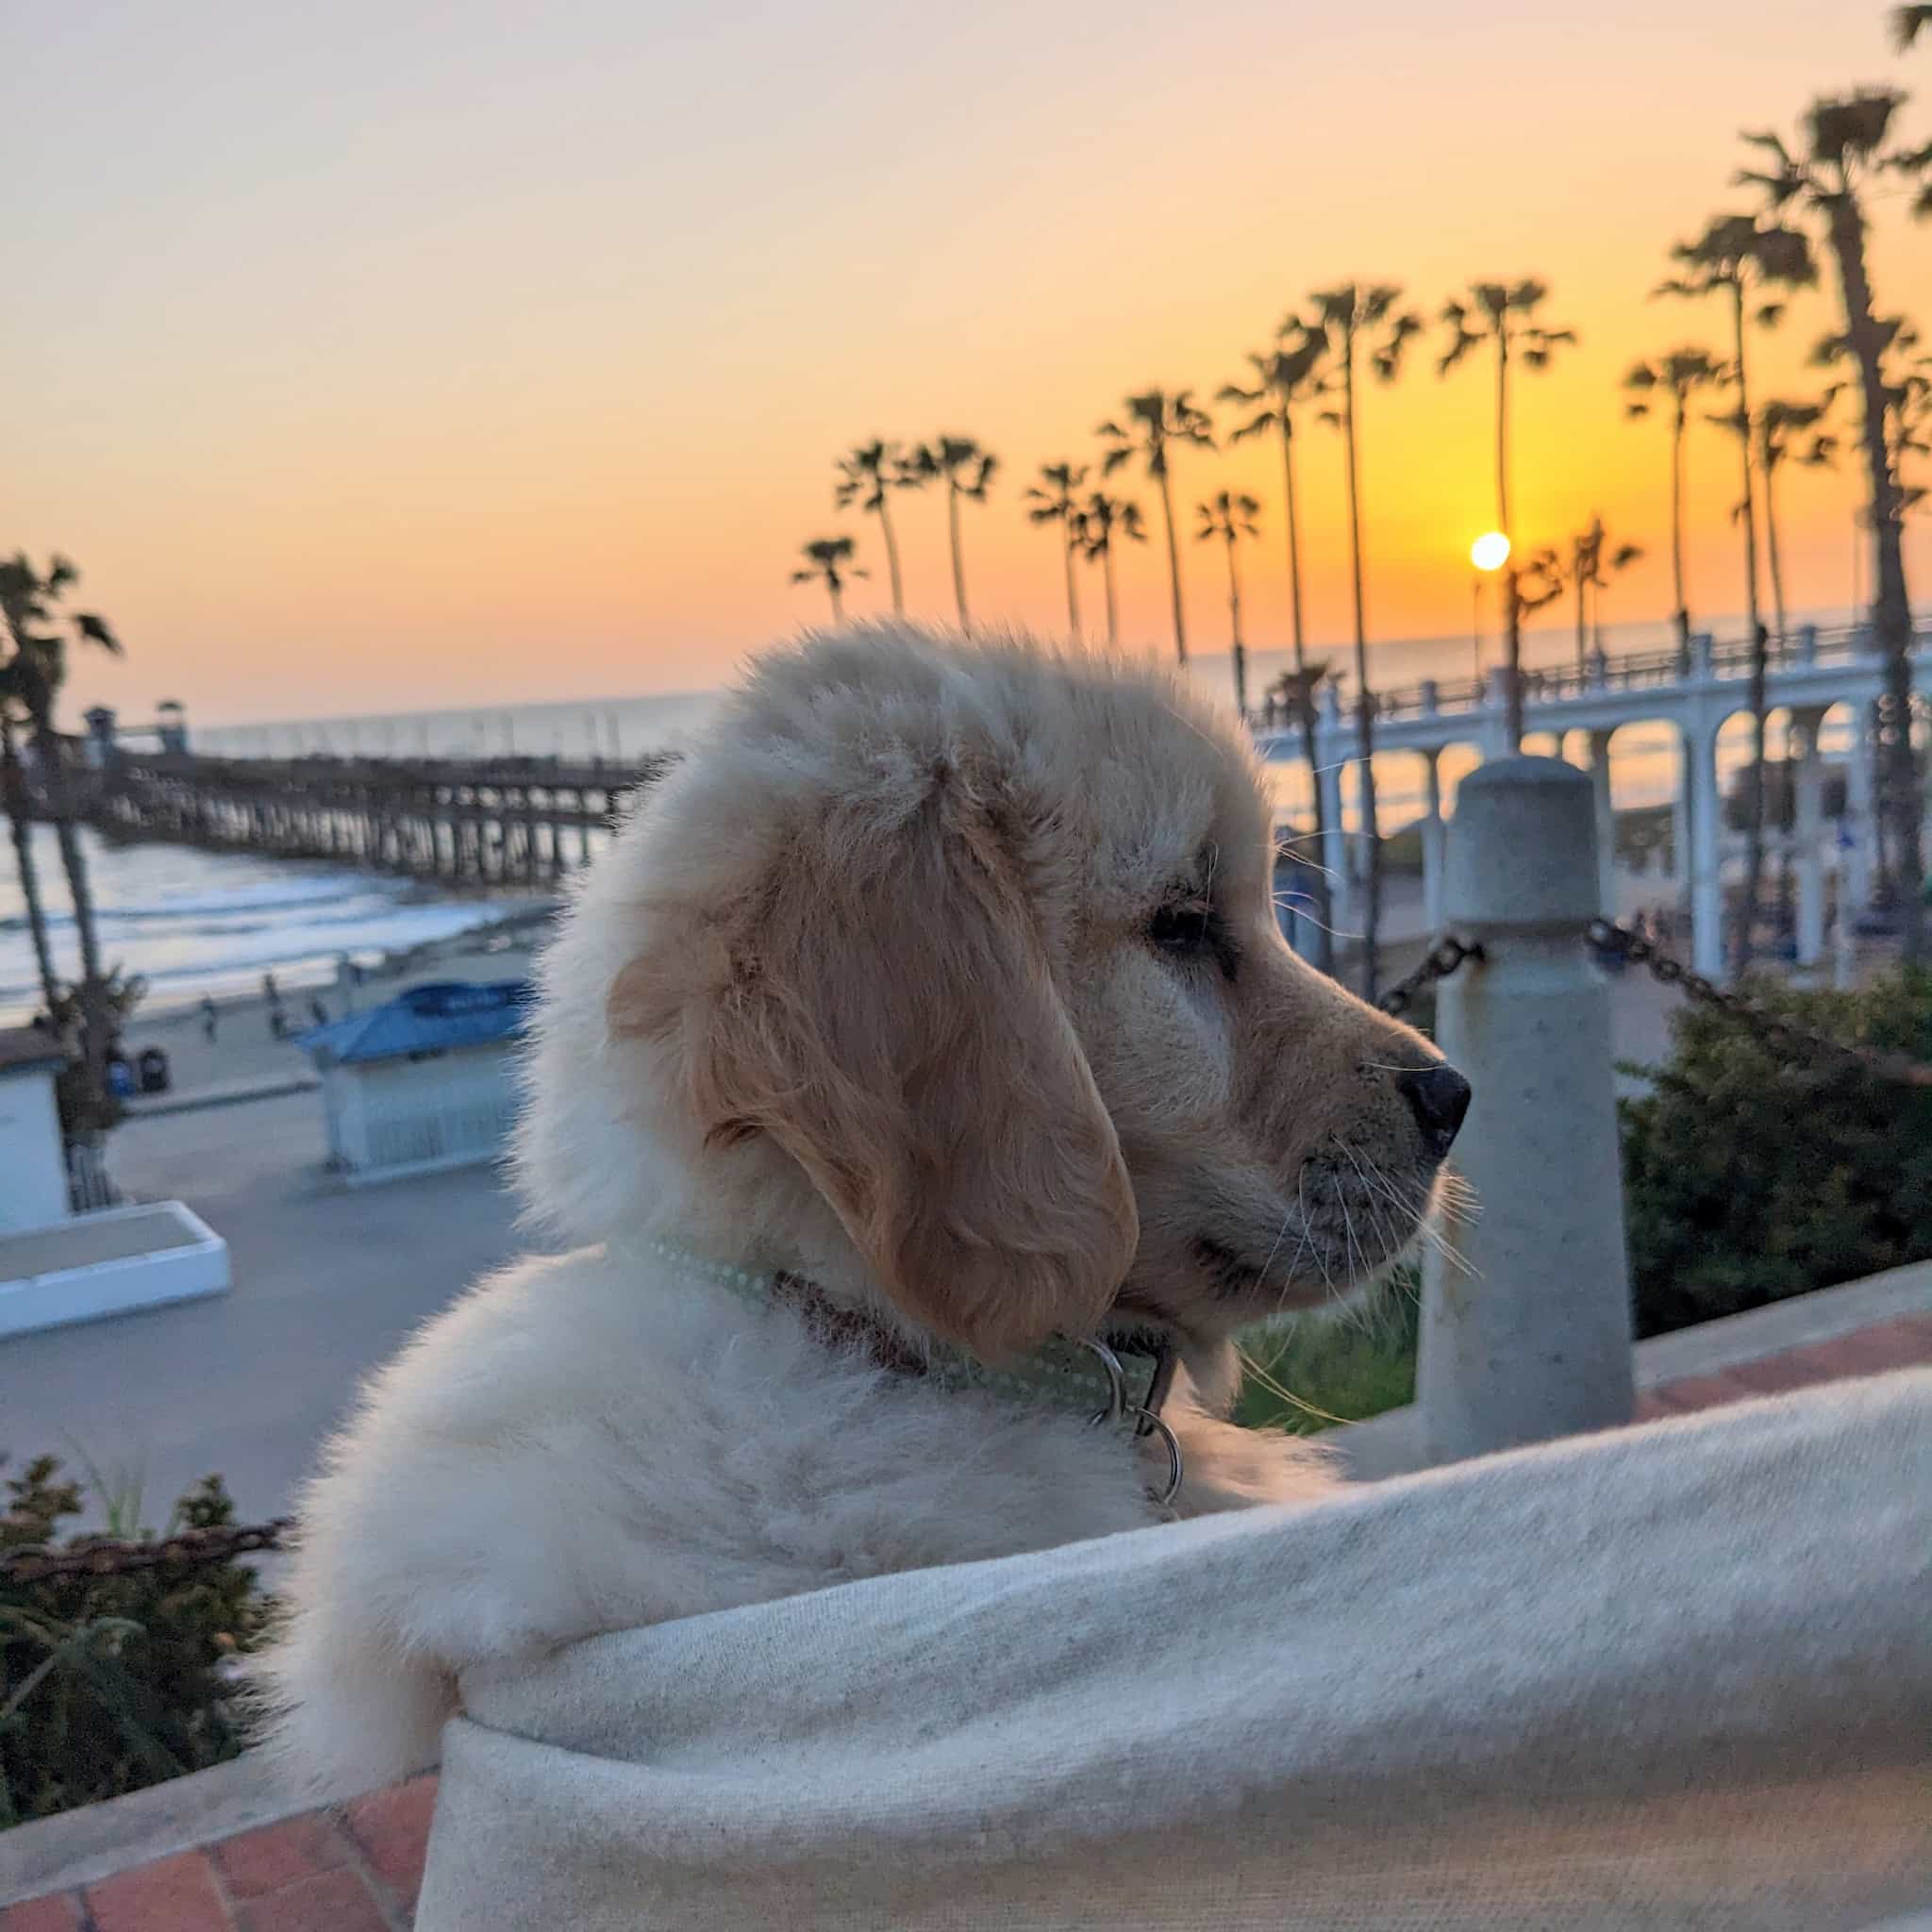 Young, furry golden retriever puppy with a ocean sunset and palm trees behind.